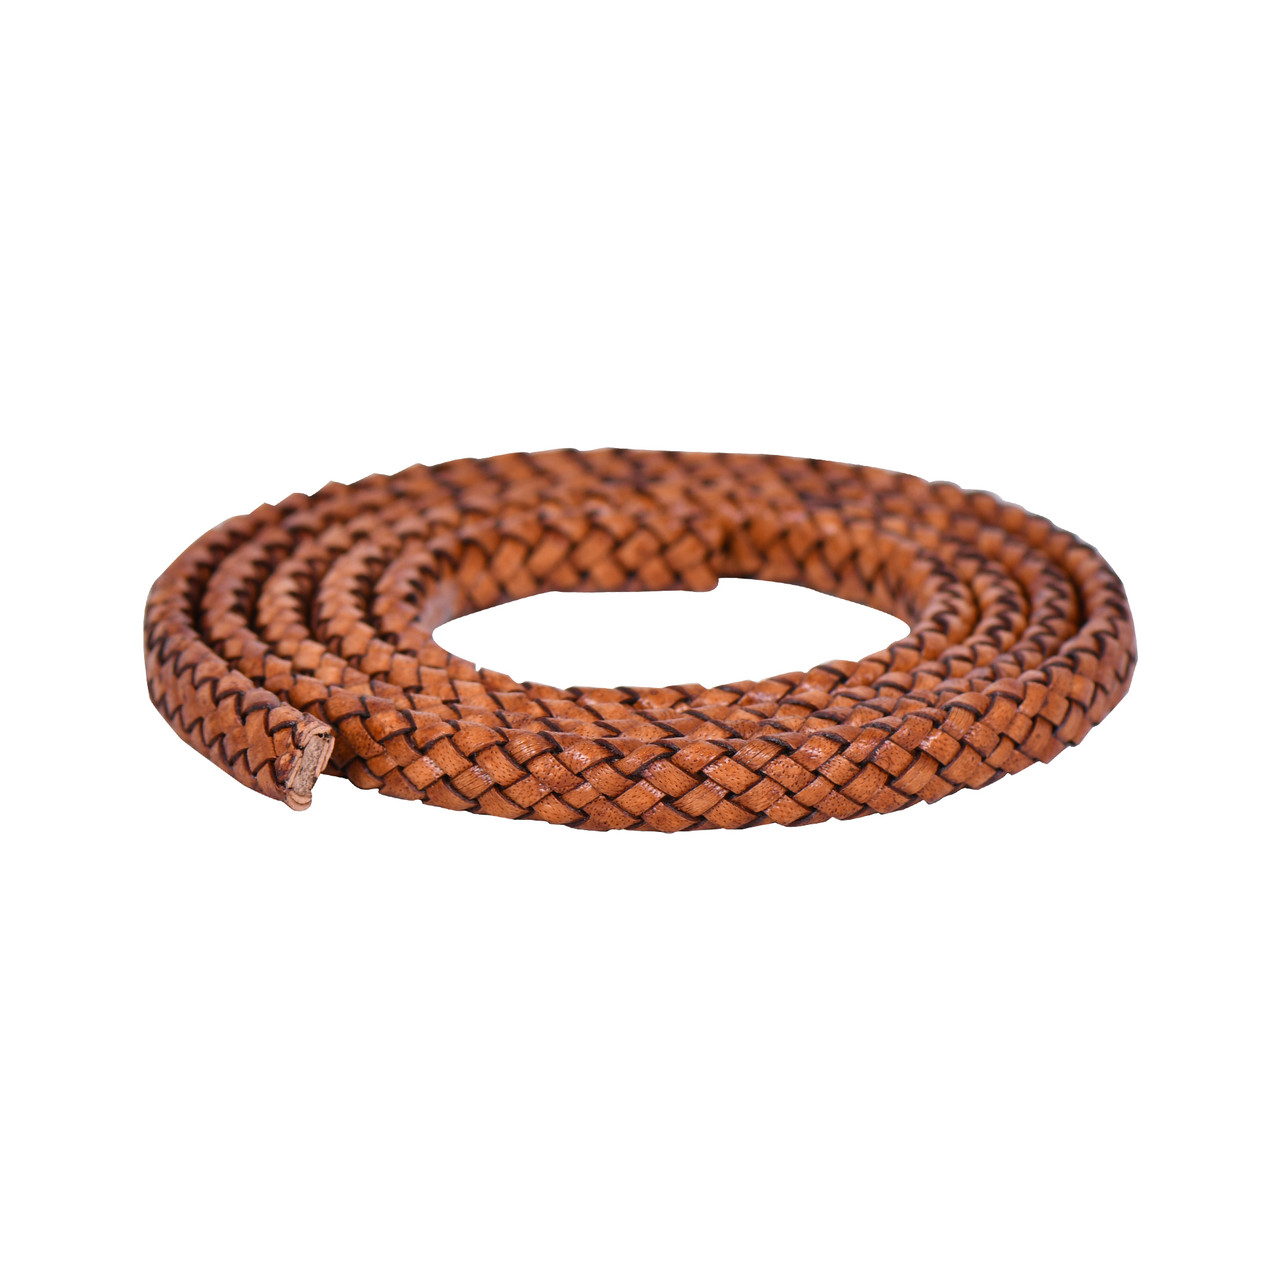 Xsotica Gypsy Sippa Natural Flat Braided Leather Cord 5 mm